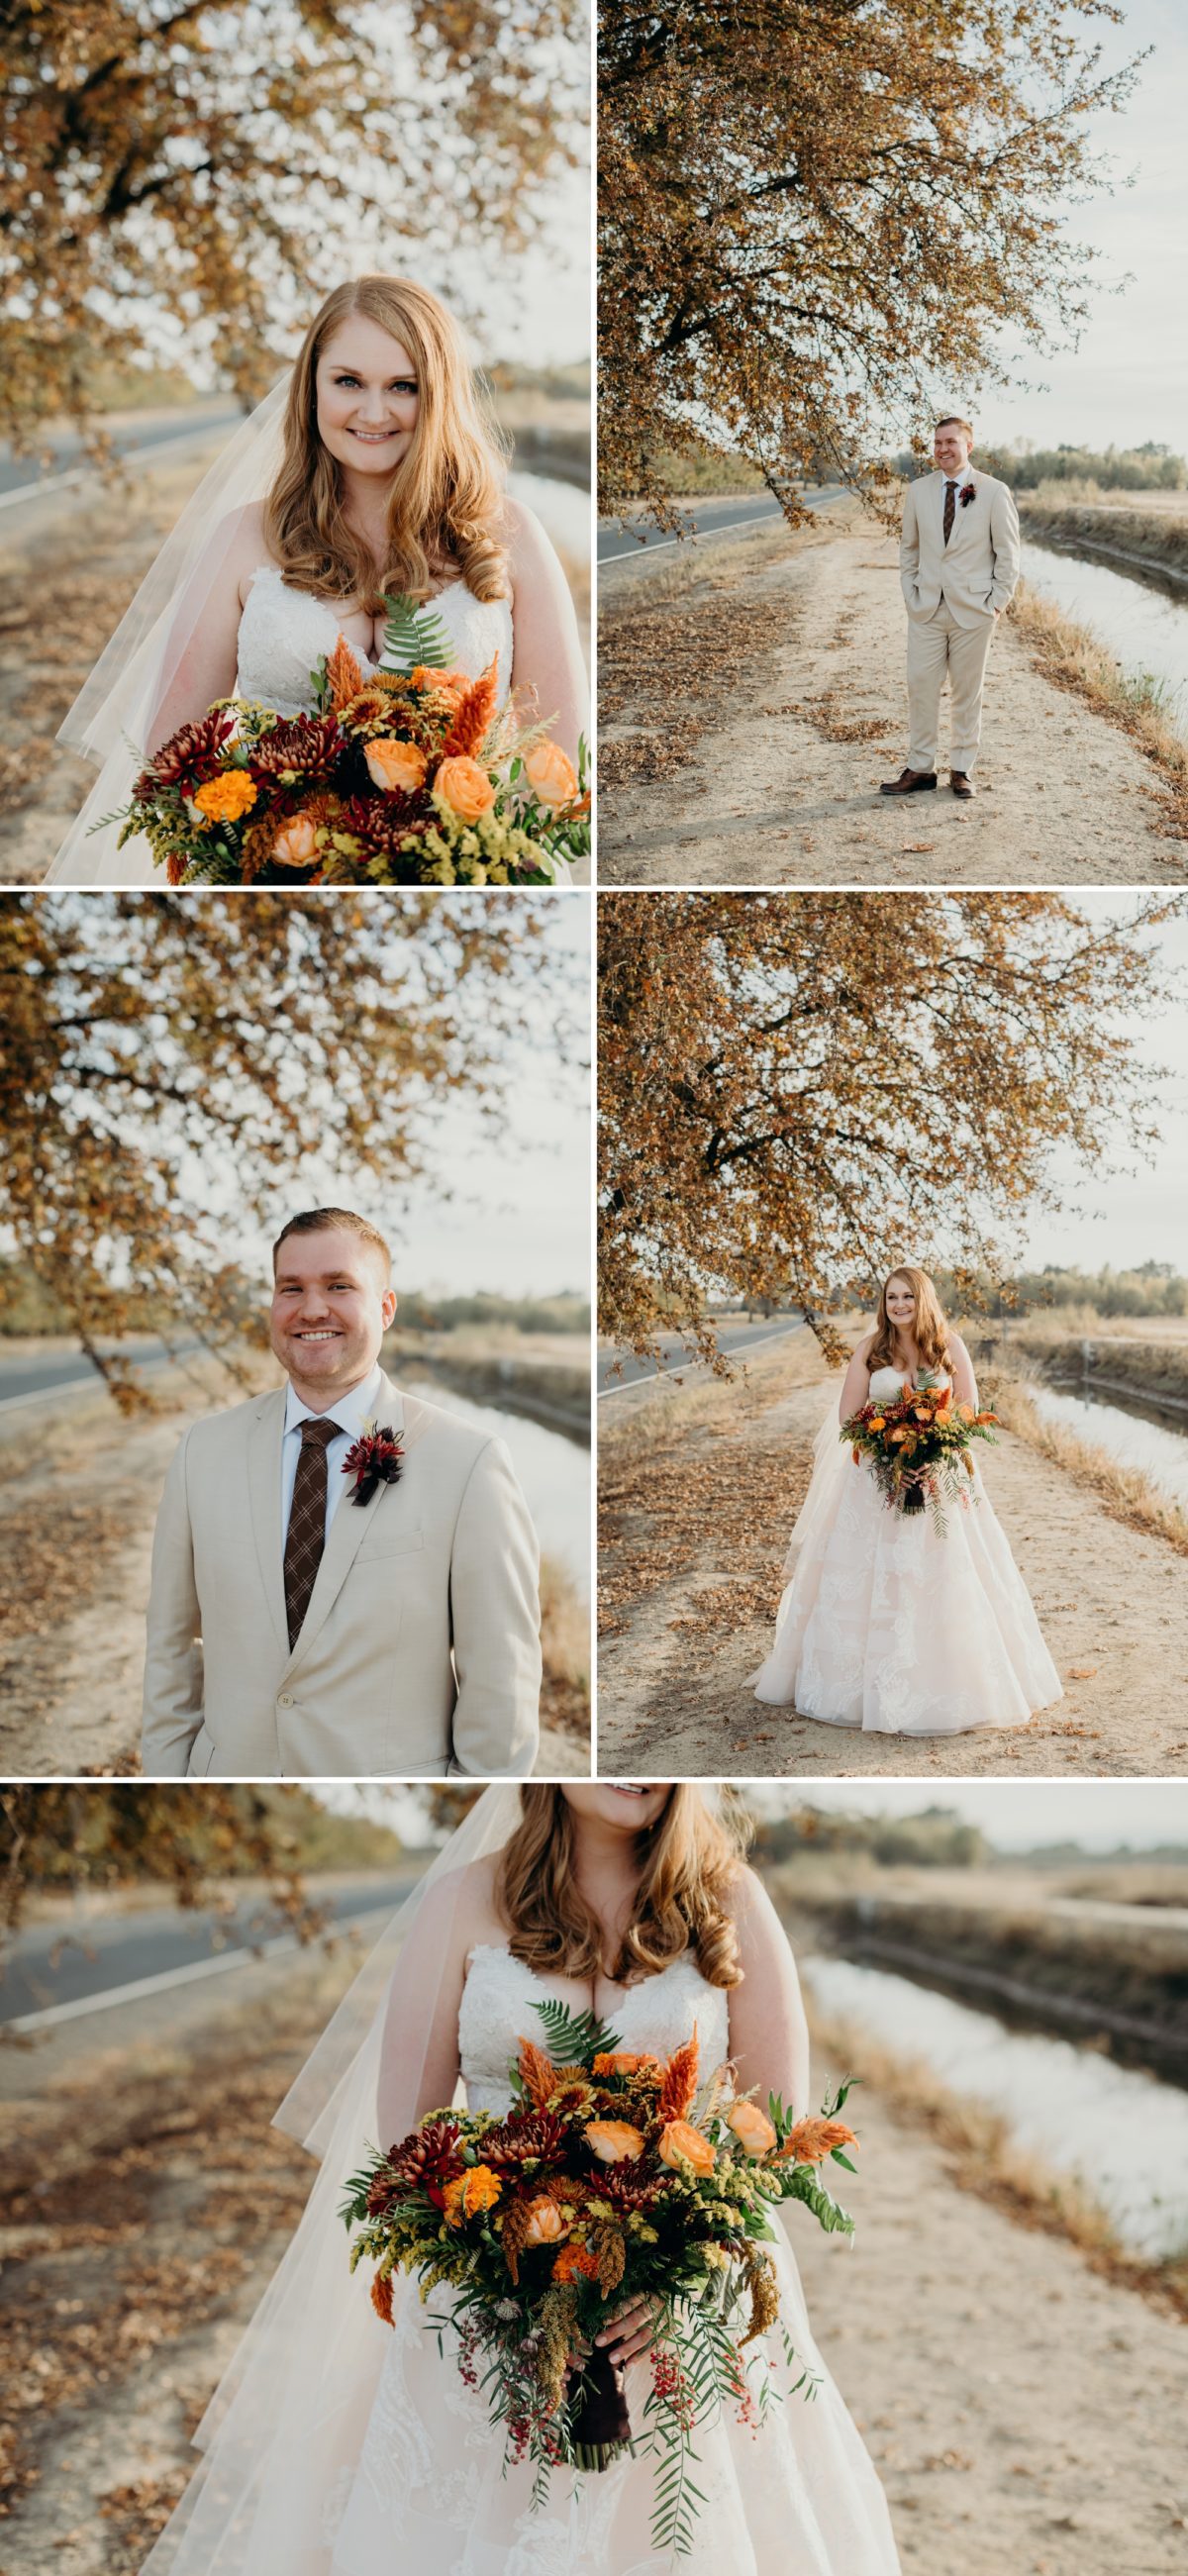 Gridley Wedding Photography by Briana Morrison